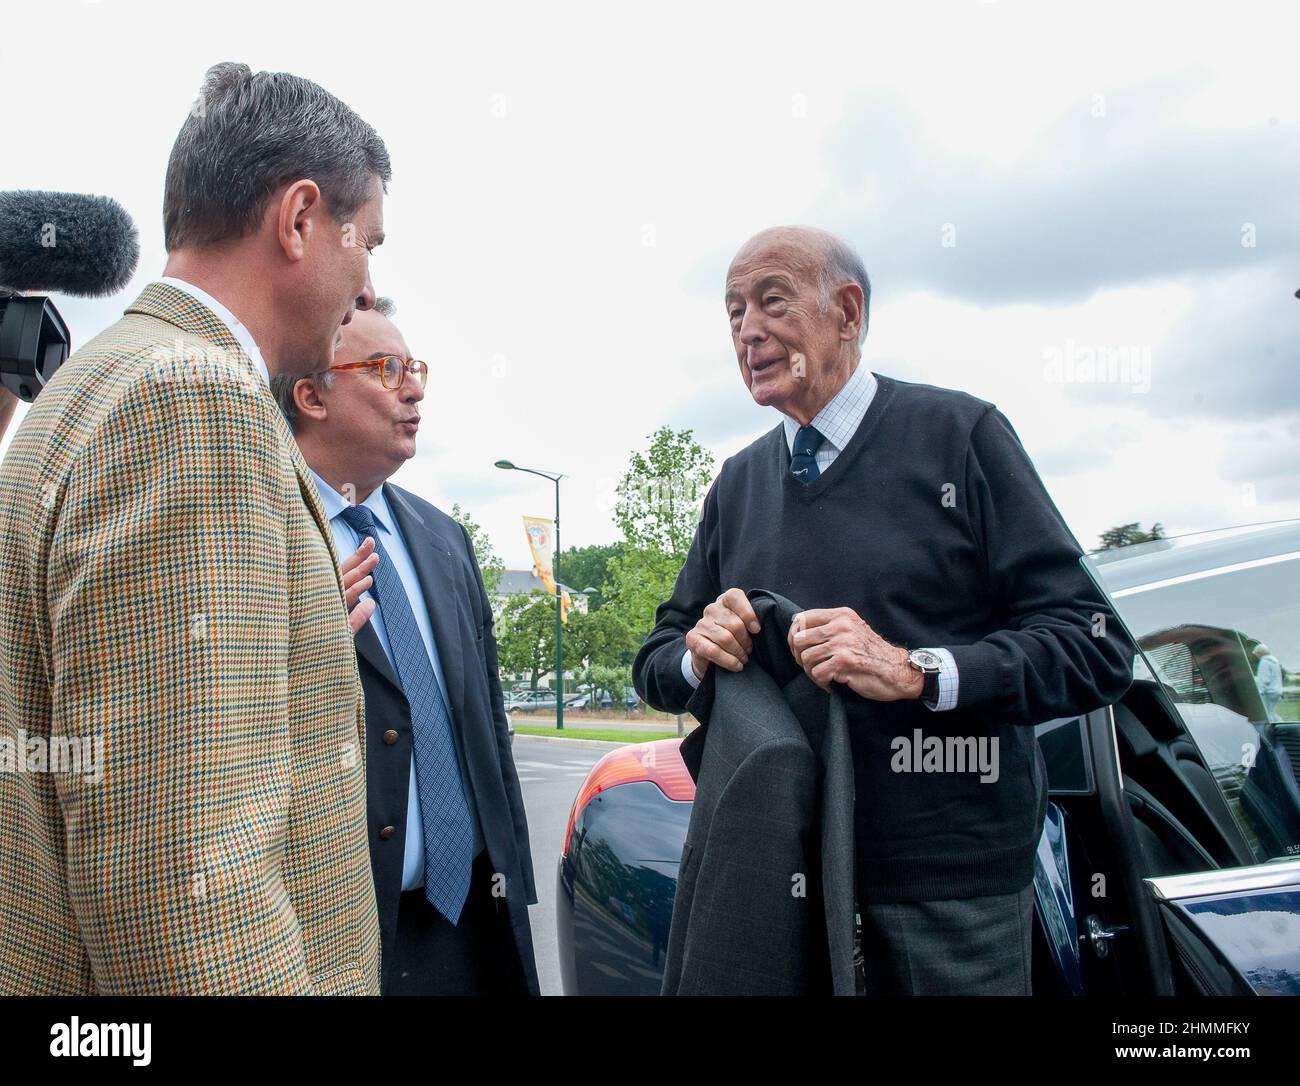 Saint-Cyr-sur-Loire (north-western France), May 29, 2010: Valéry Giscard d'Estaing, former President of the French Republic, at the “Chapiteau du livre” Book Fair Stock Photo